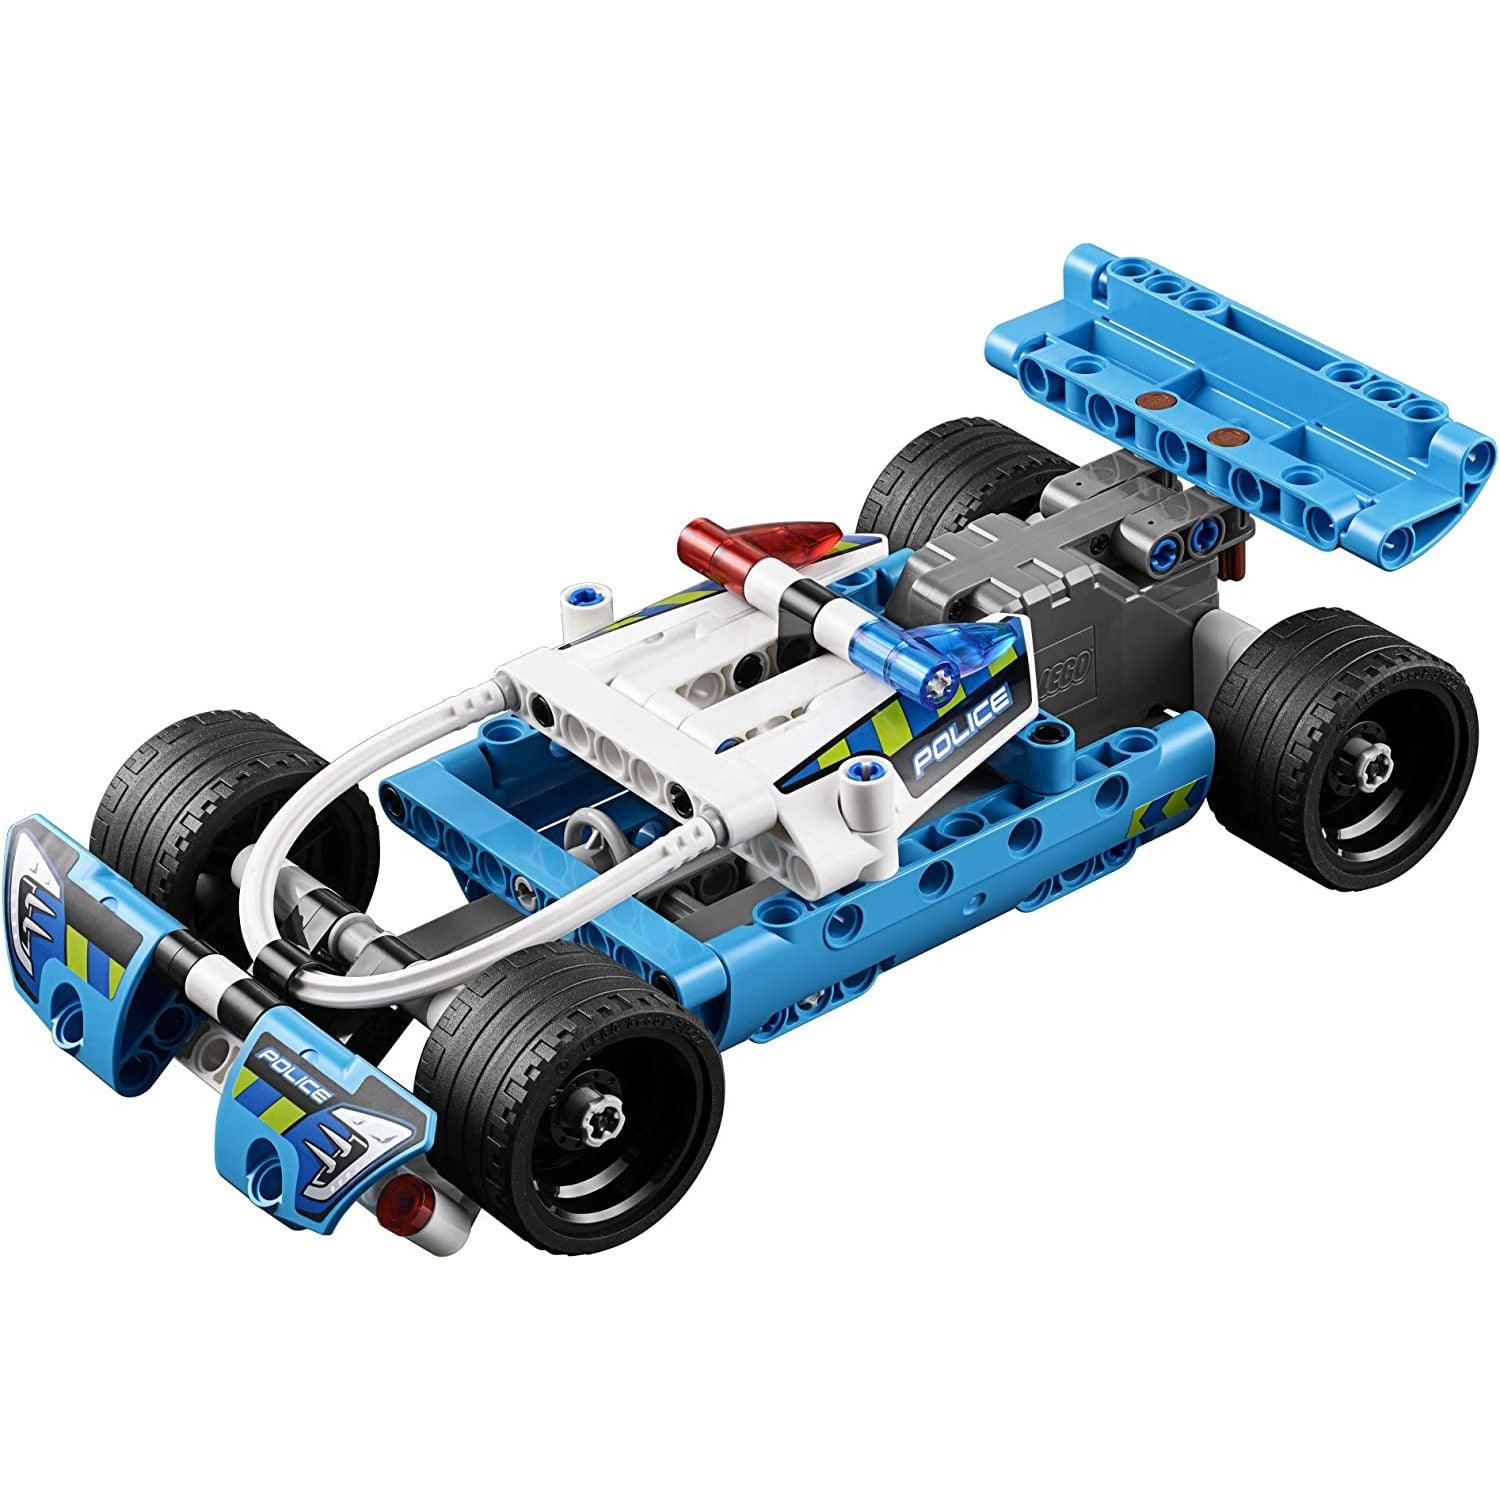 LEGO Technic Police Pursuit 42091 Building Kit (120 Pieces) - BumbleToys - 18+, 6+ Years, Boys, Cars, LEGO, OXE, Technic